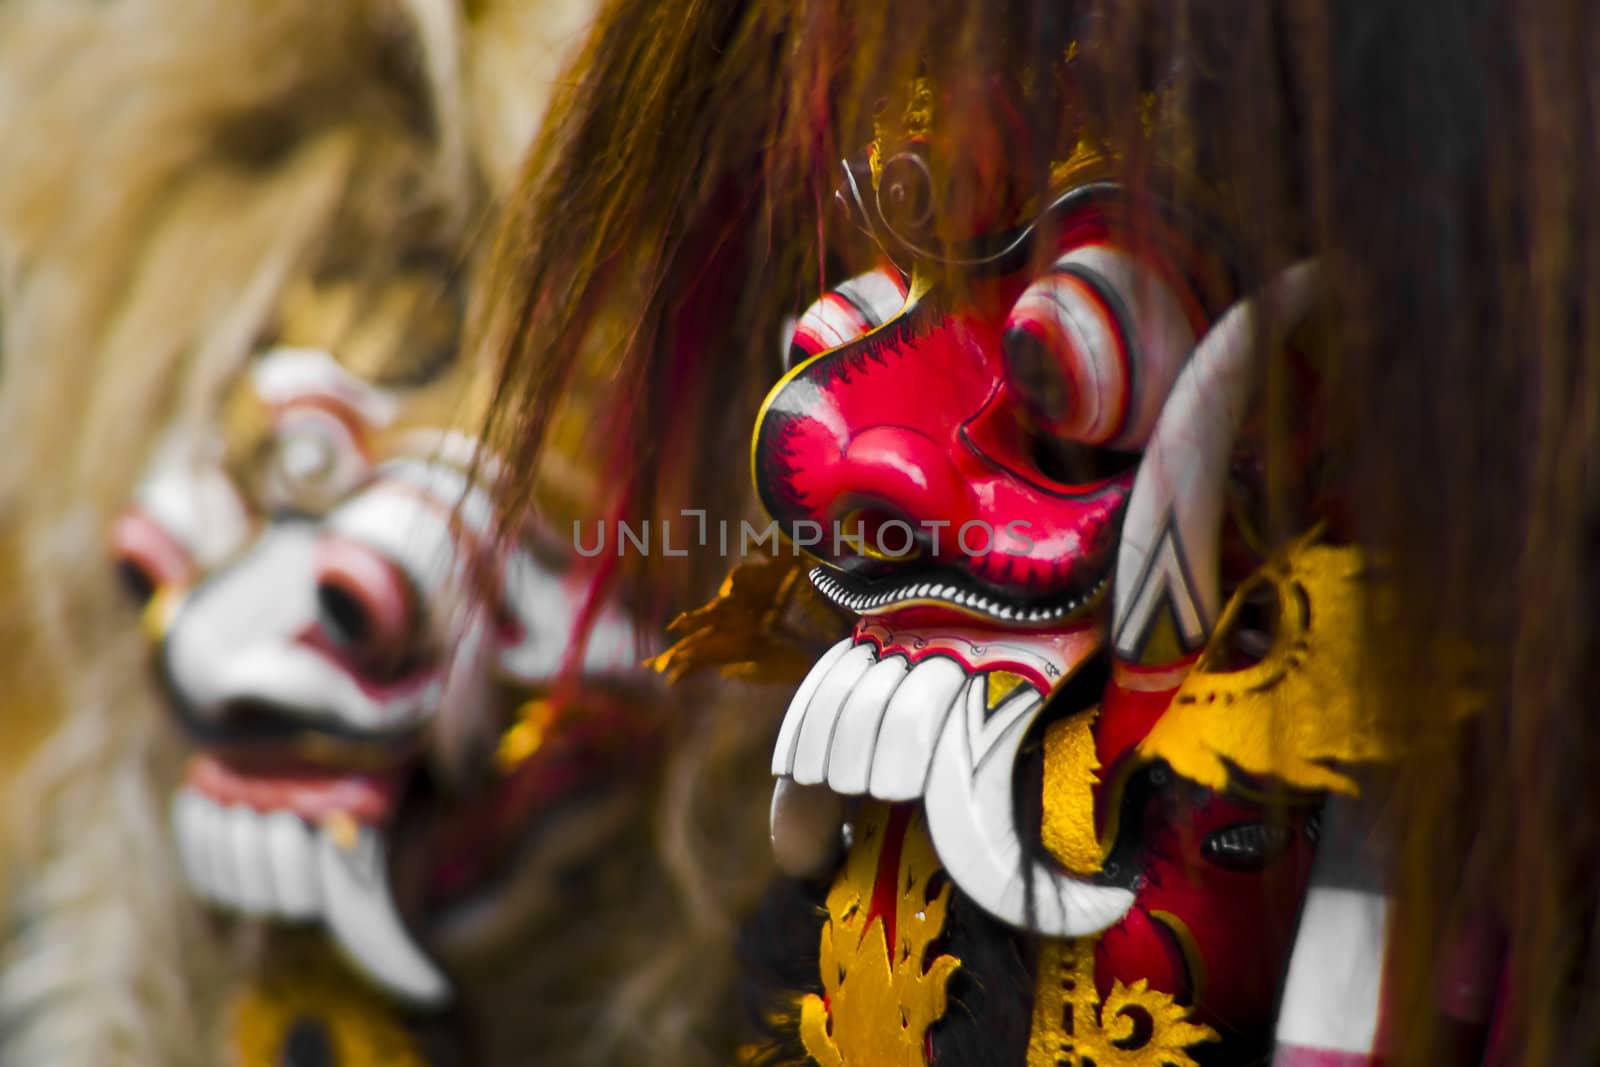 Mask use in religious dance in Bali, Indonesia.